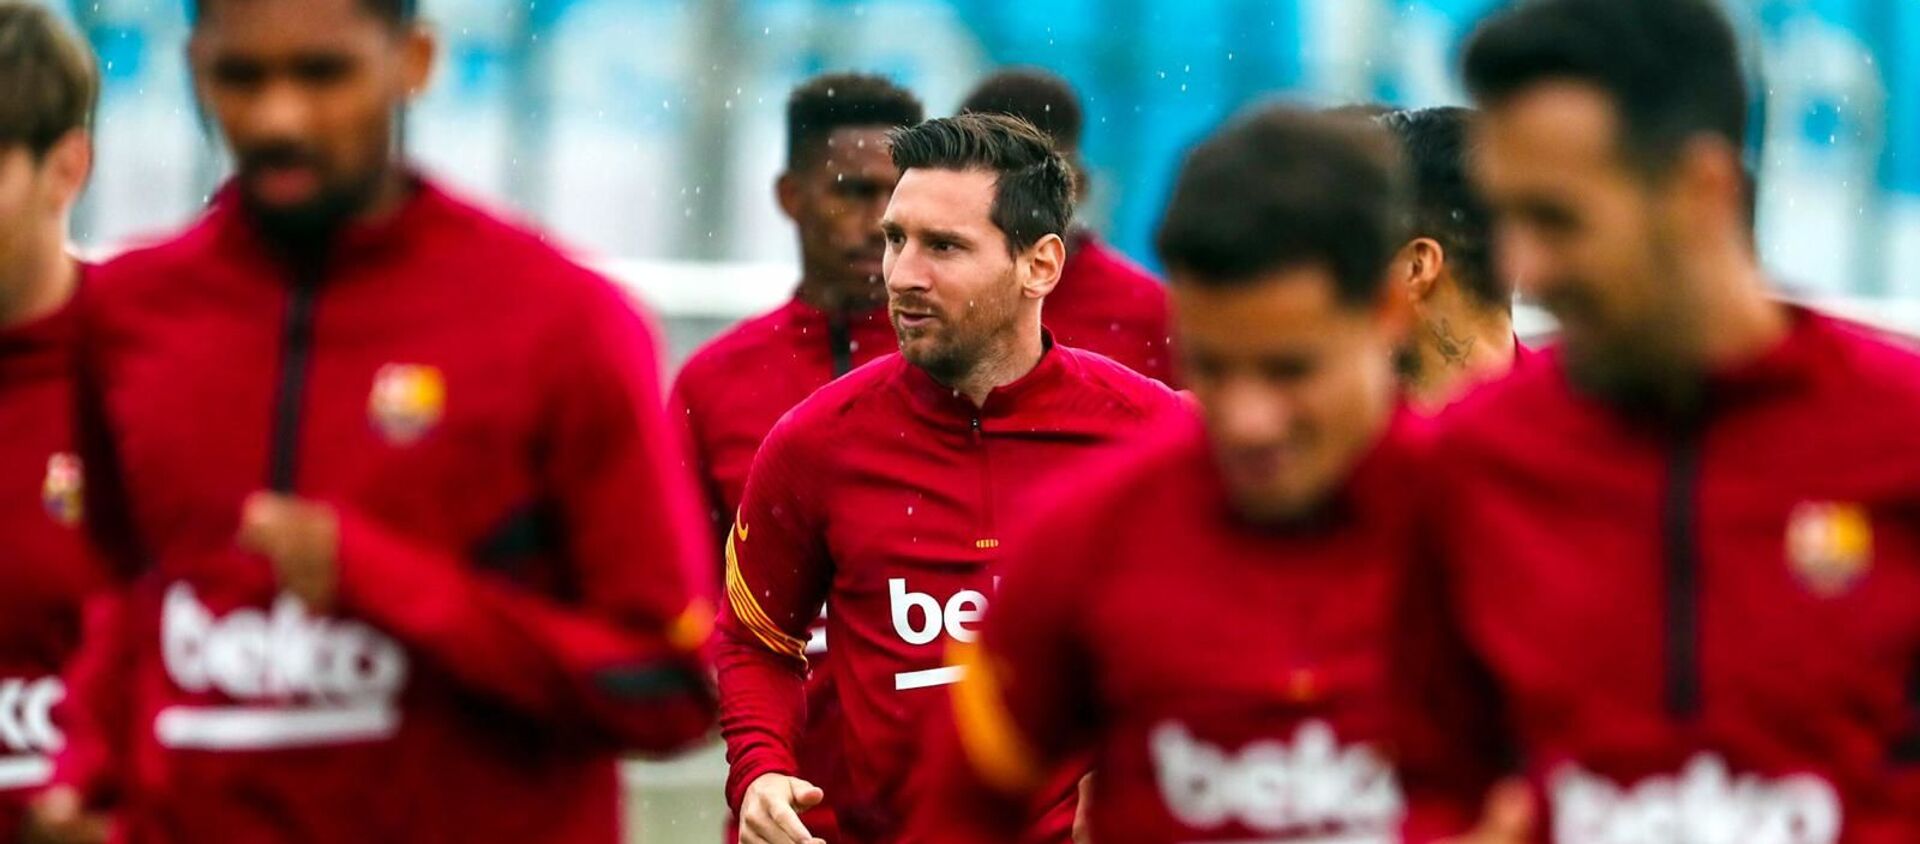 First workout of the day Lionel Messi - اسپوتنیک افغانستان  , 1920, 06.02.2021